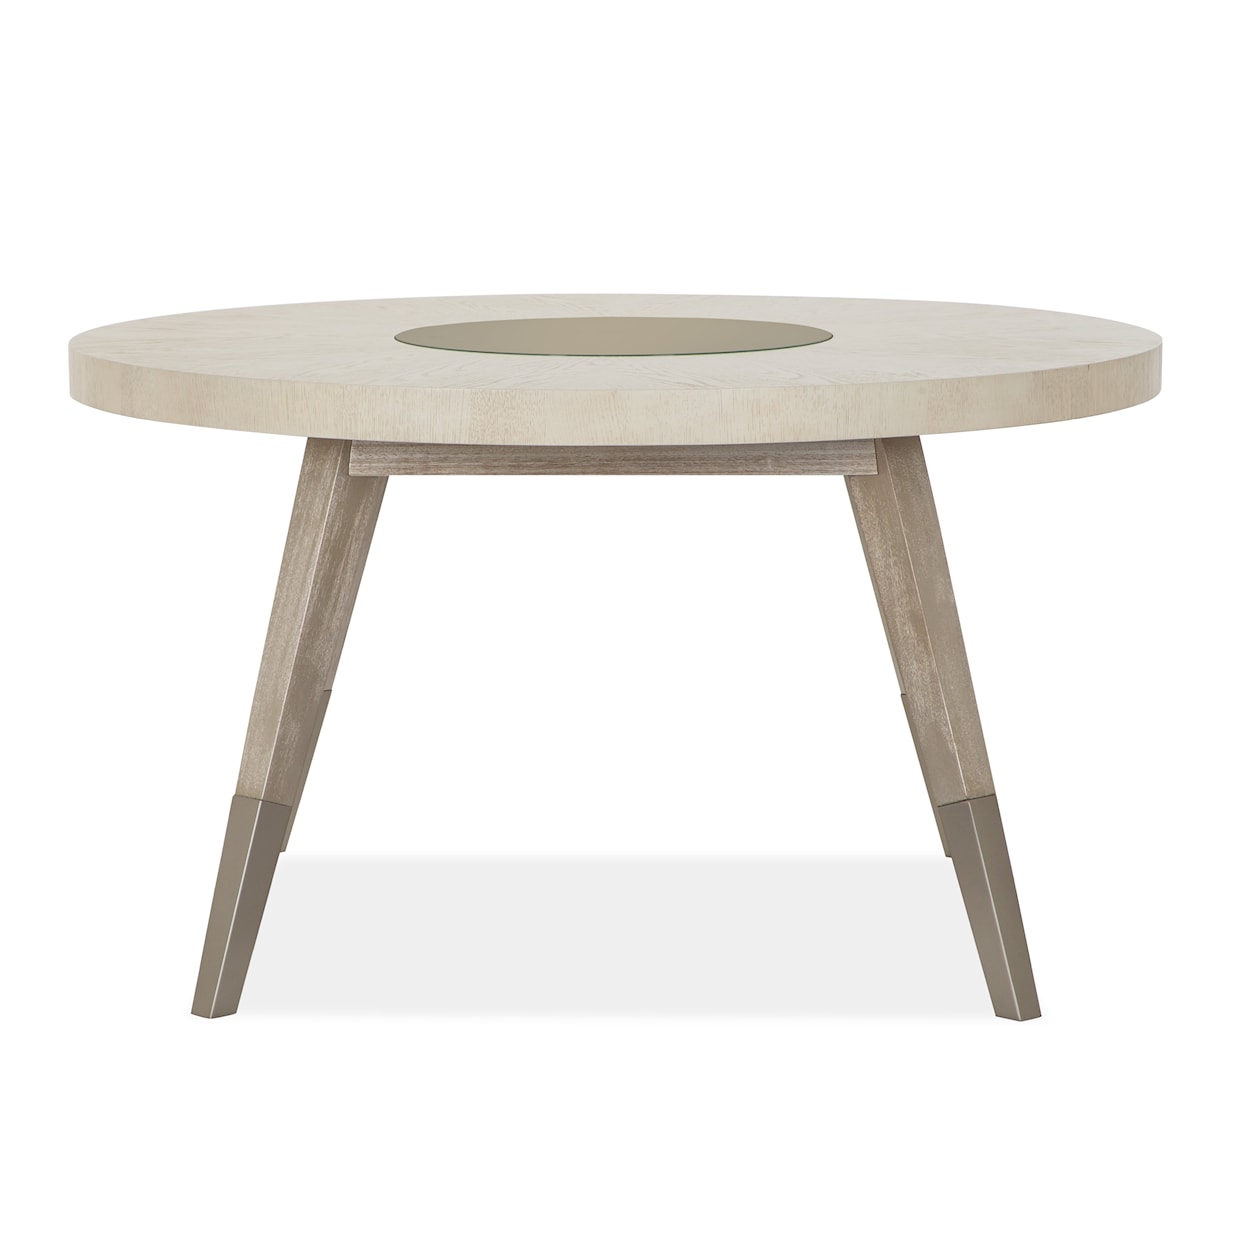 Magnussen Home Lenox Dining Round Dining Table